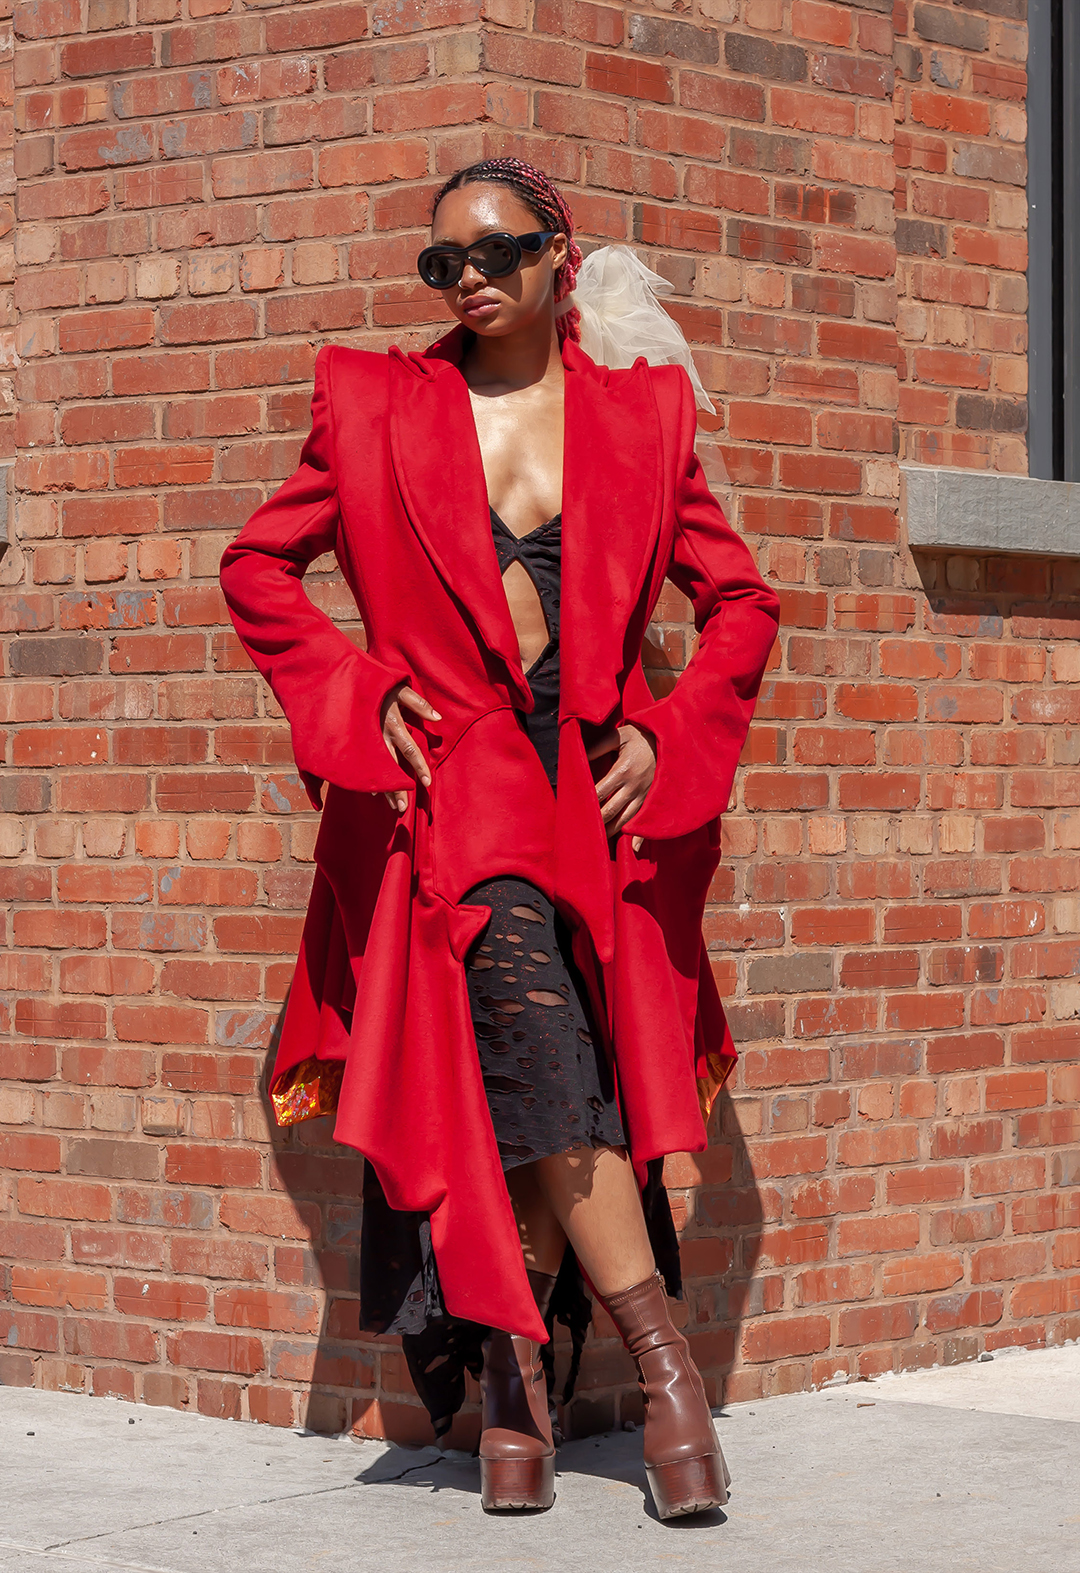 Front view of Traci posing in the Burgeon Coat. She has her hands on her hips and her legs are crossed. She wears black sunglasses and is standing in front of a brick wall. 